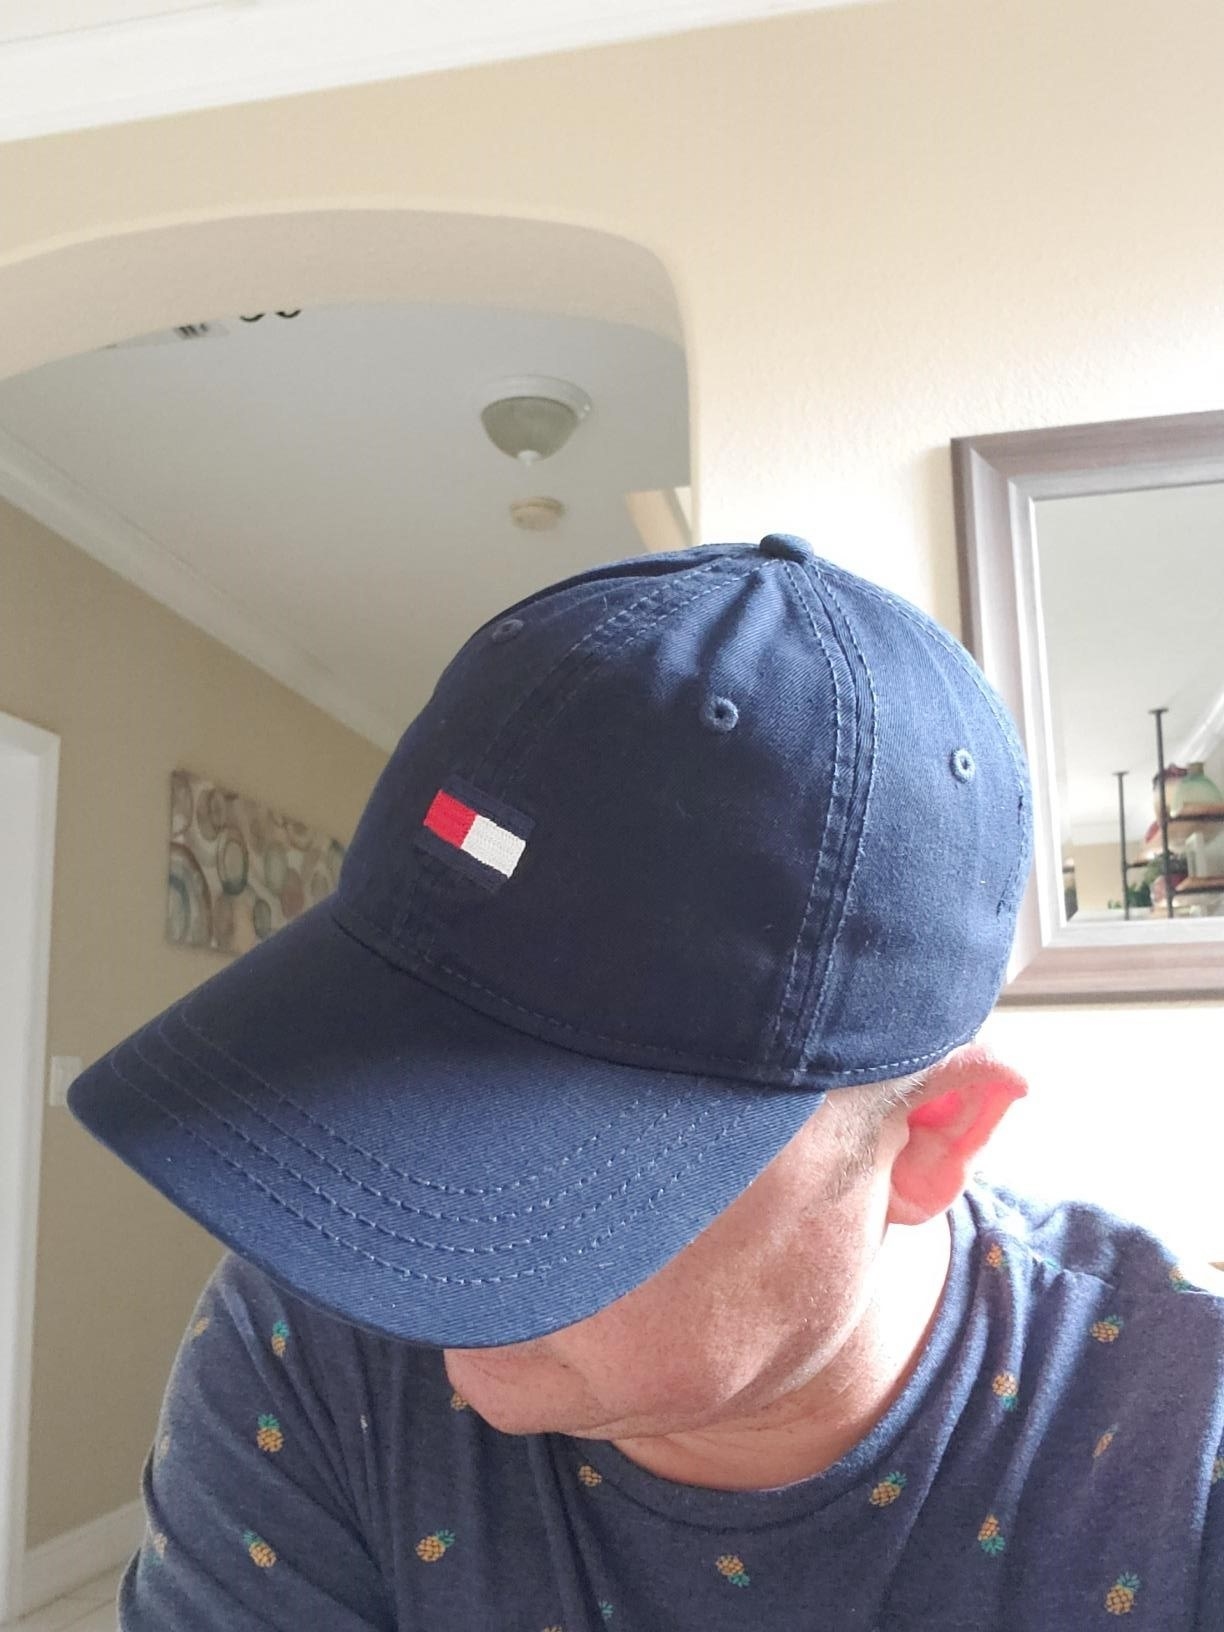 Amazon reviewer&#x27;s photo of wearing their navy blue cap